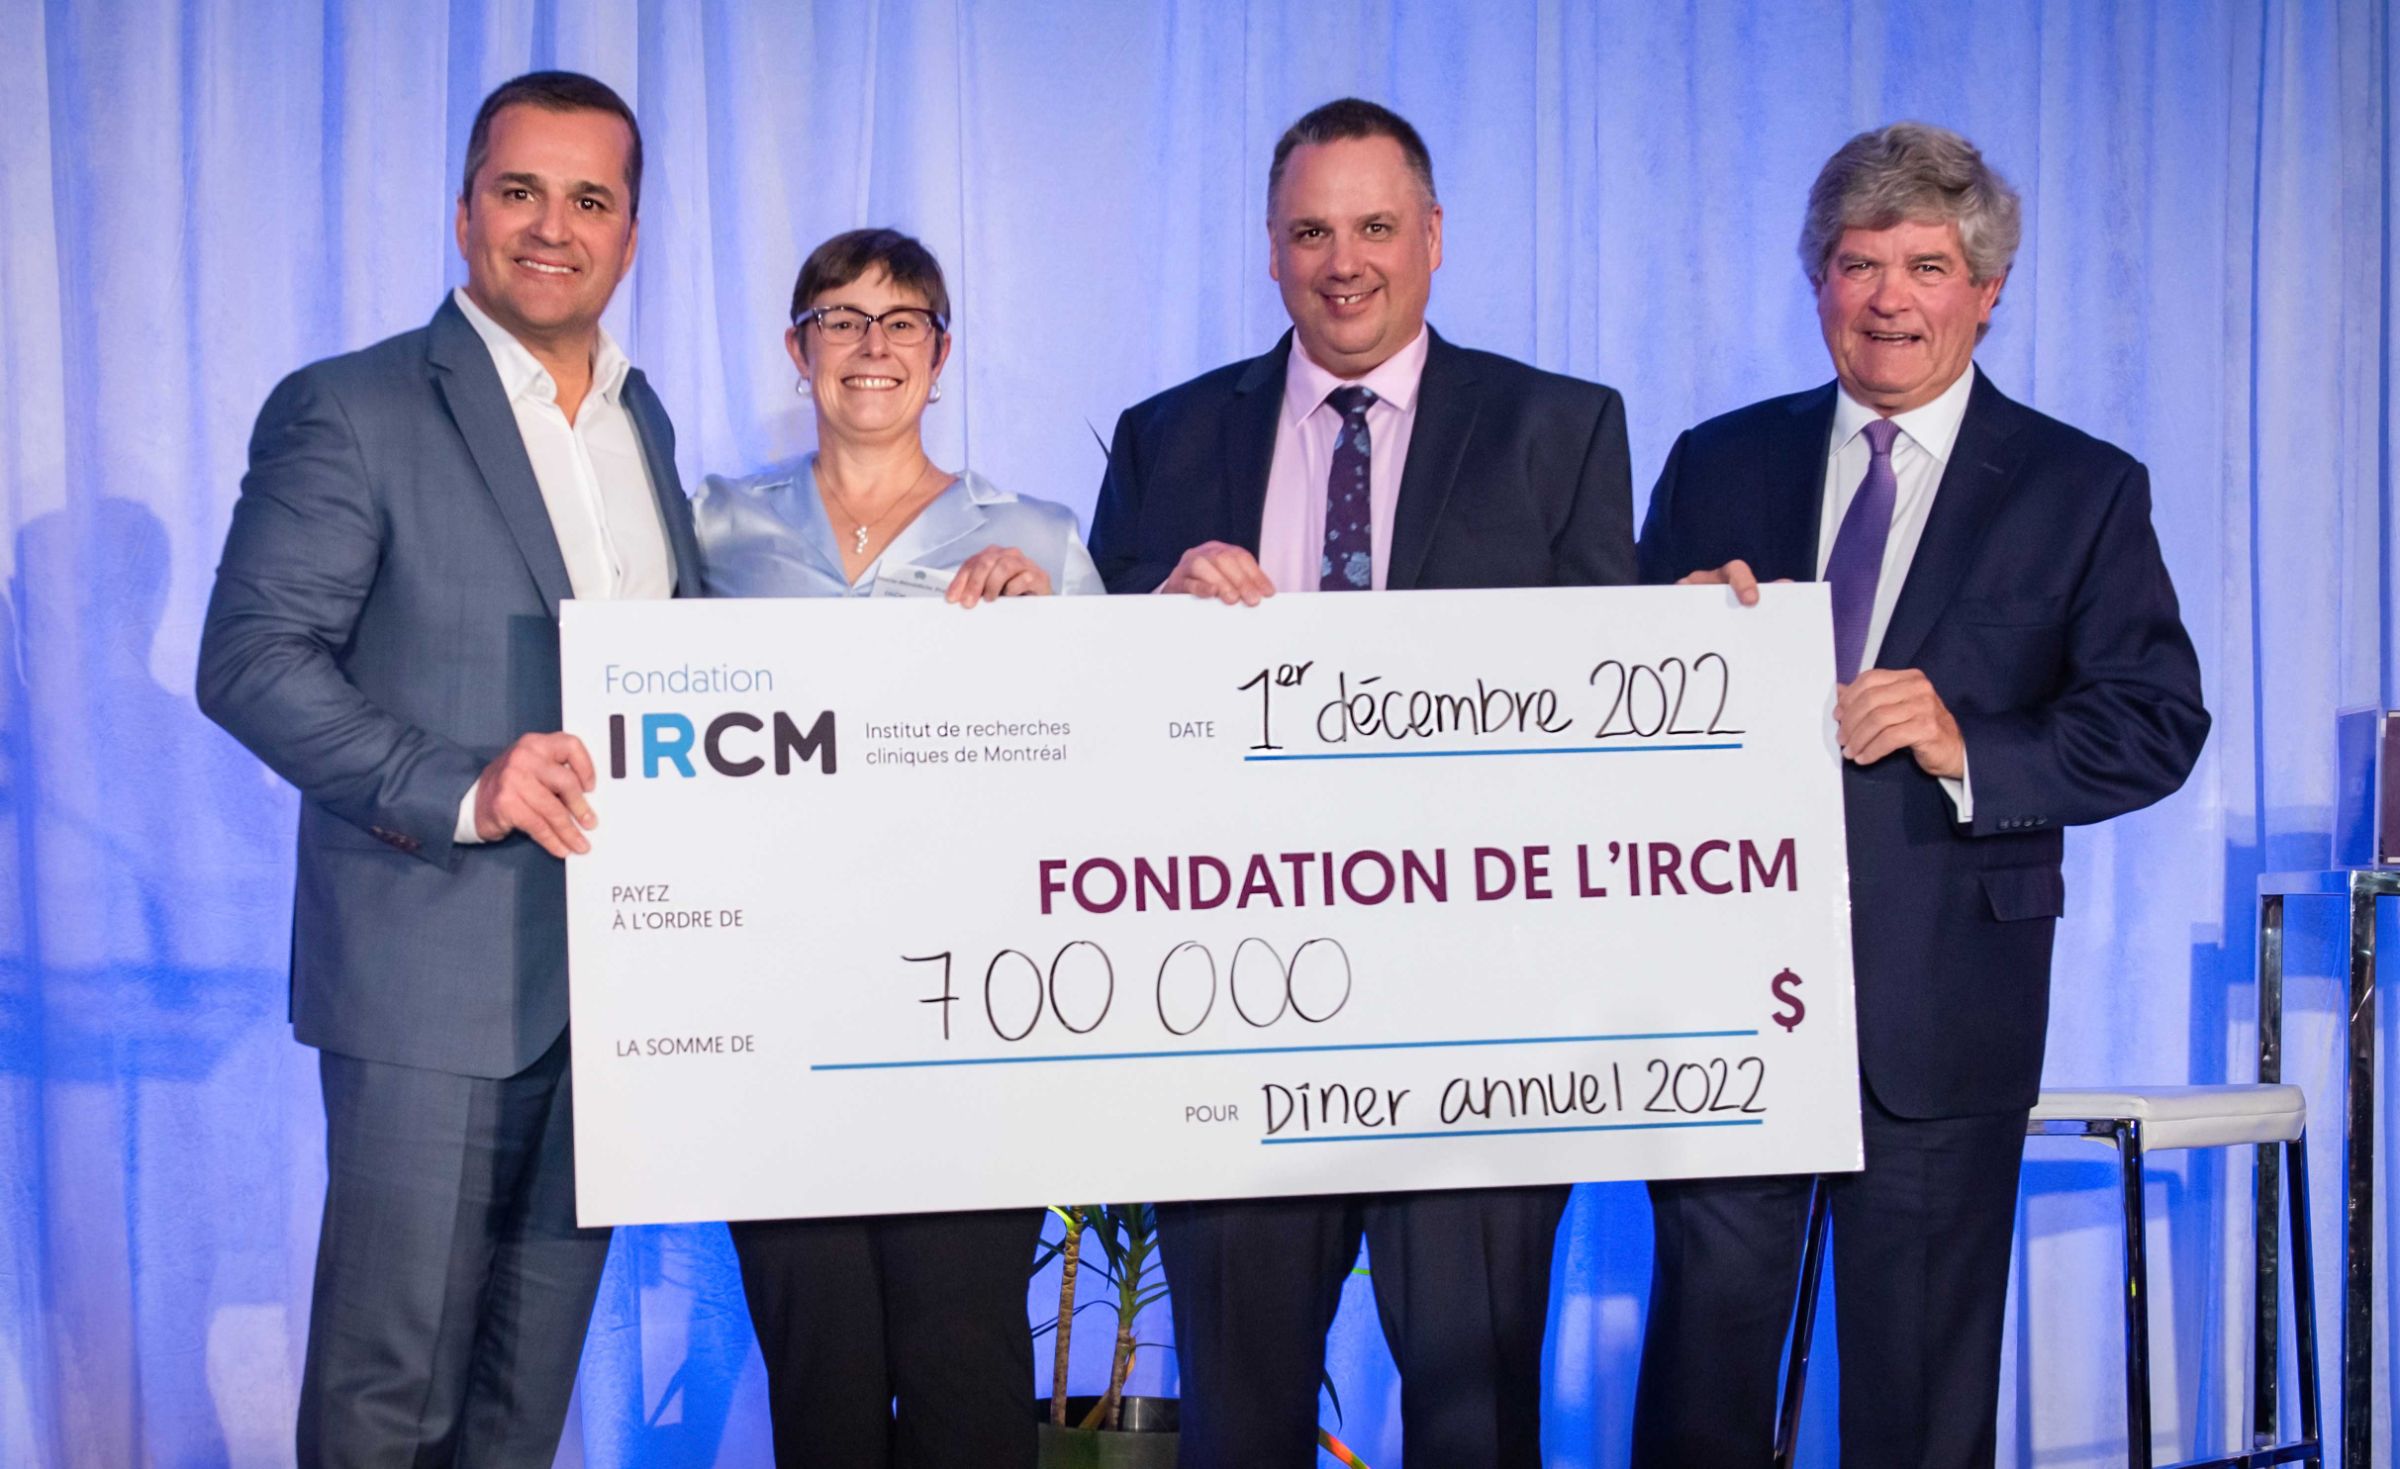 Annual Dinner of the IRCM Foundation: $ 700 000 for health research!